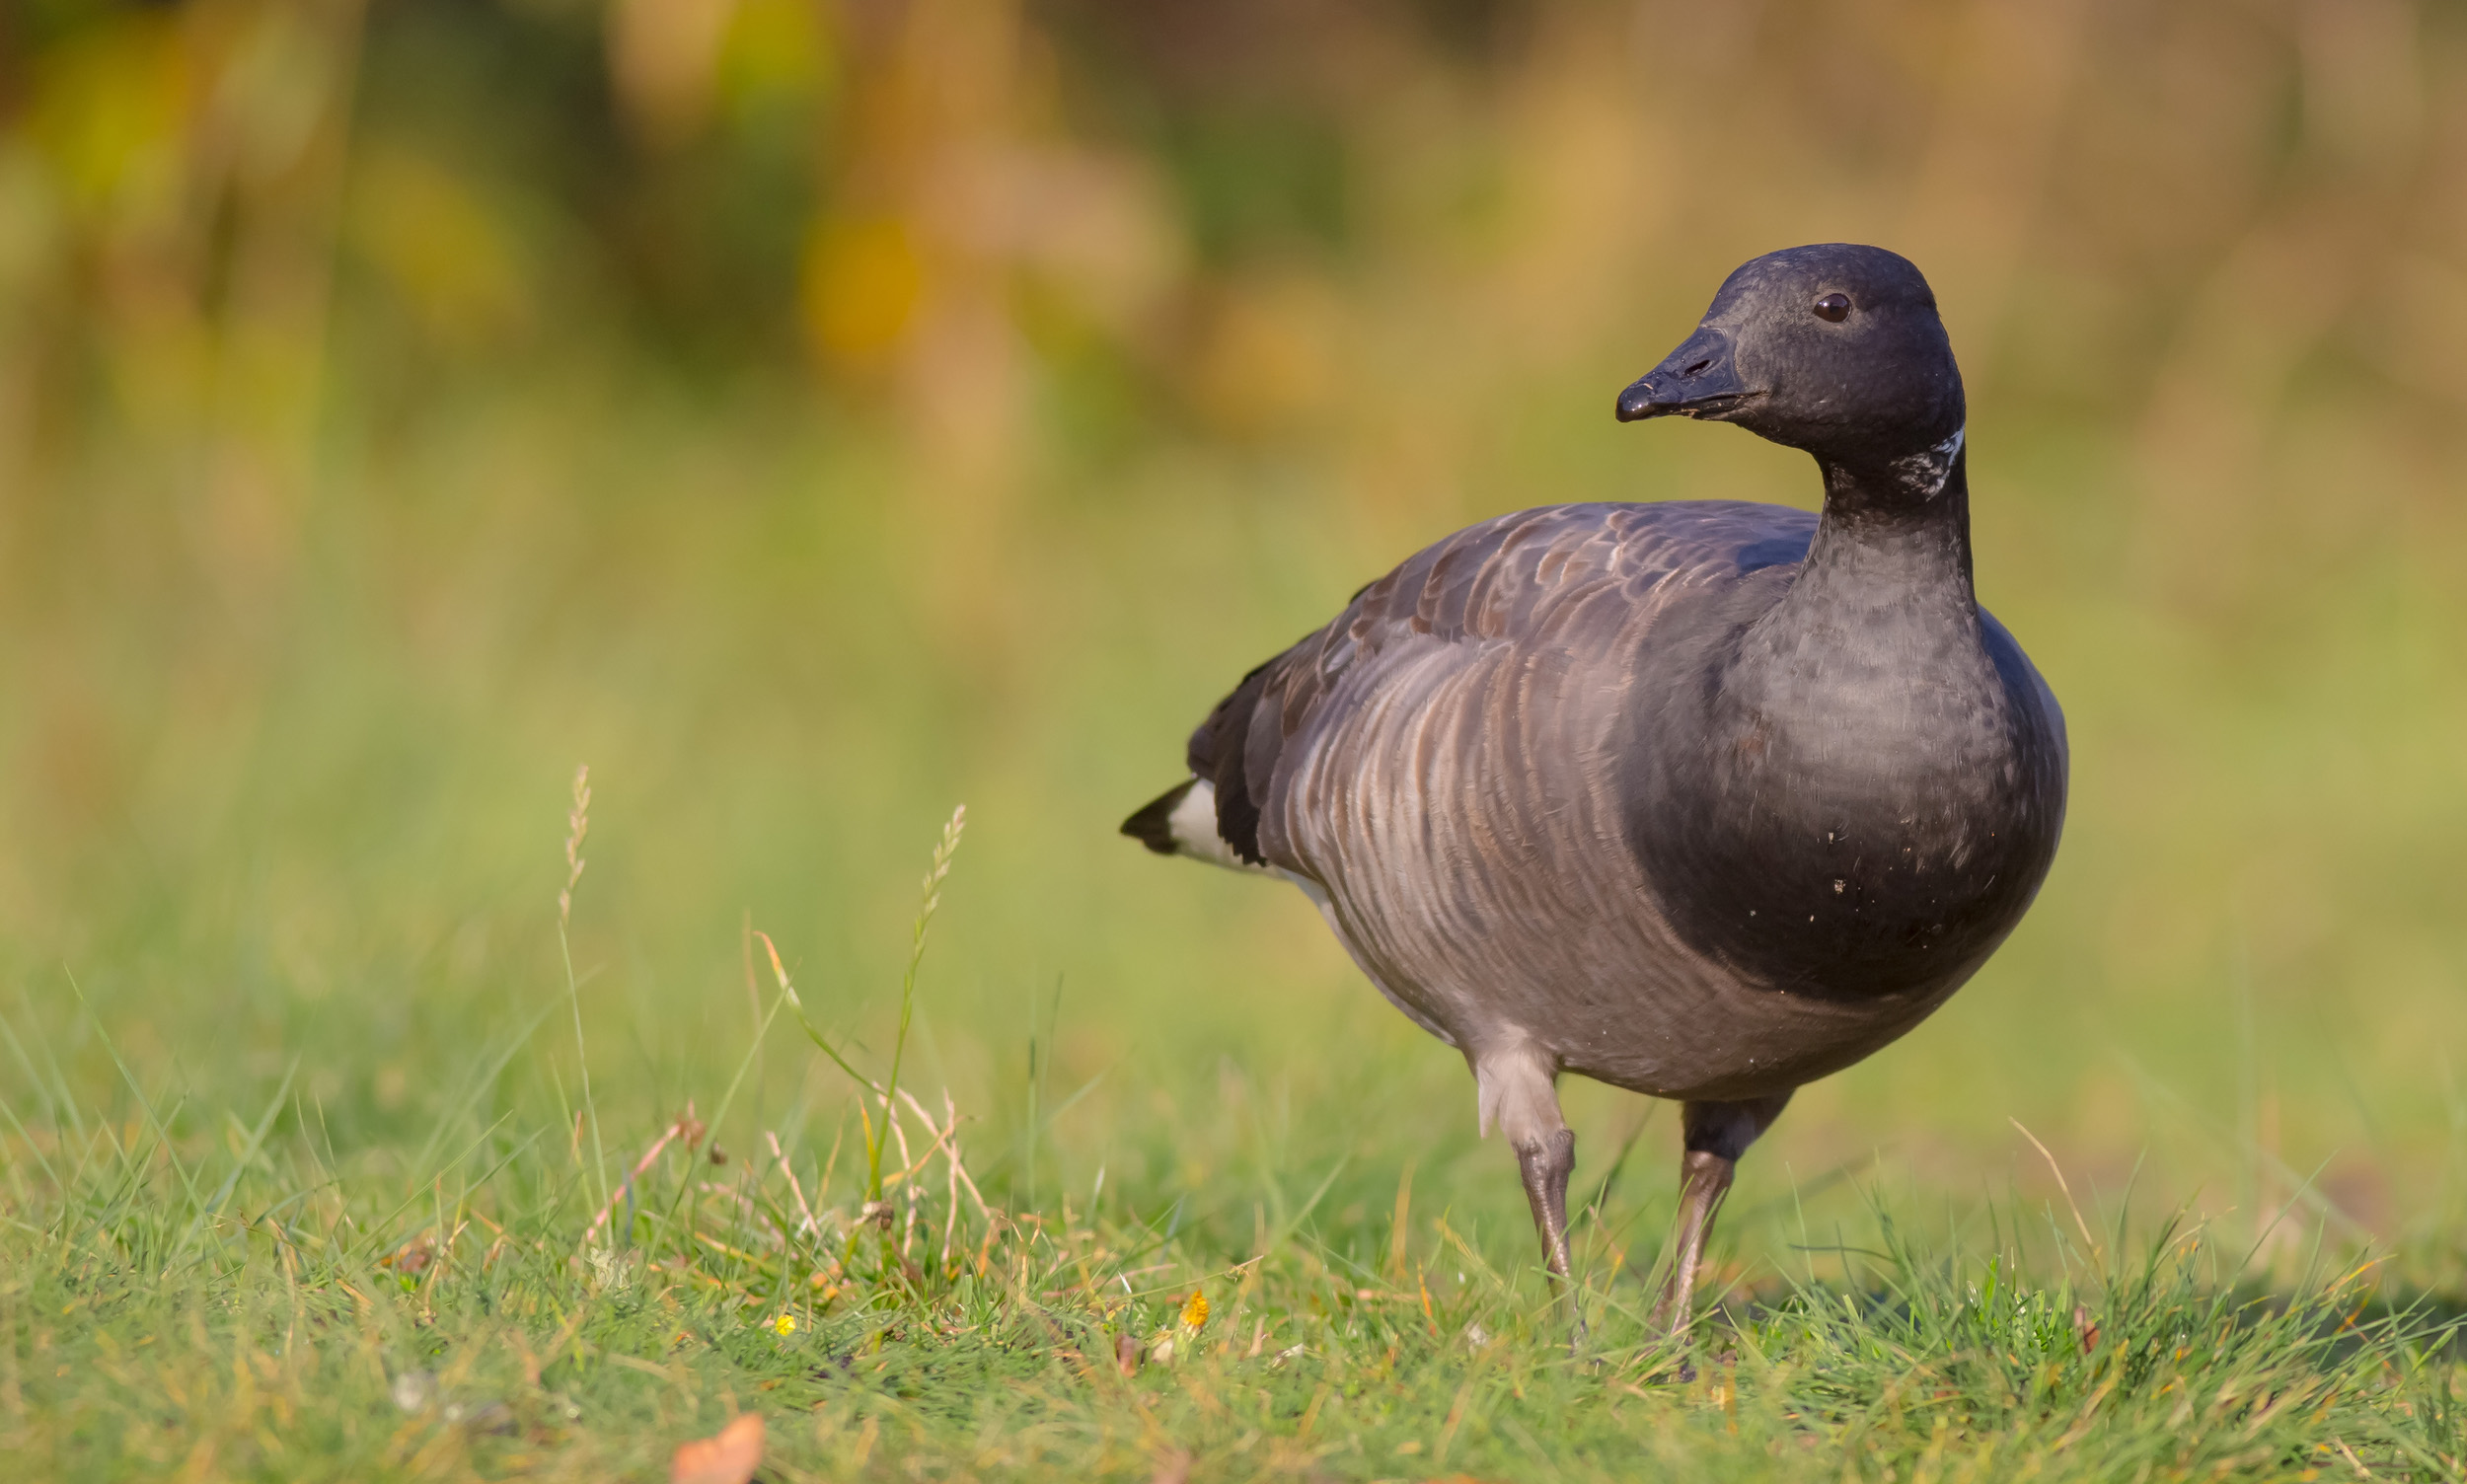 A lone Brent Goose stood in a grassy meadow.